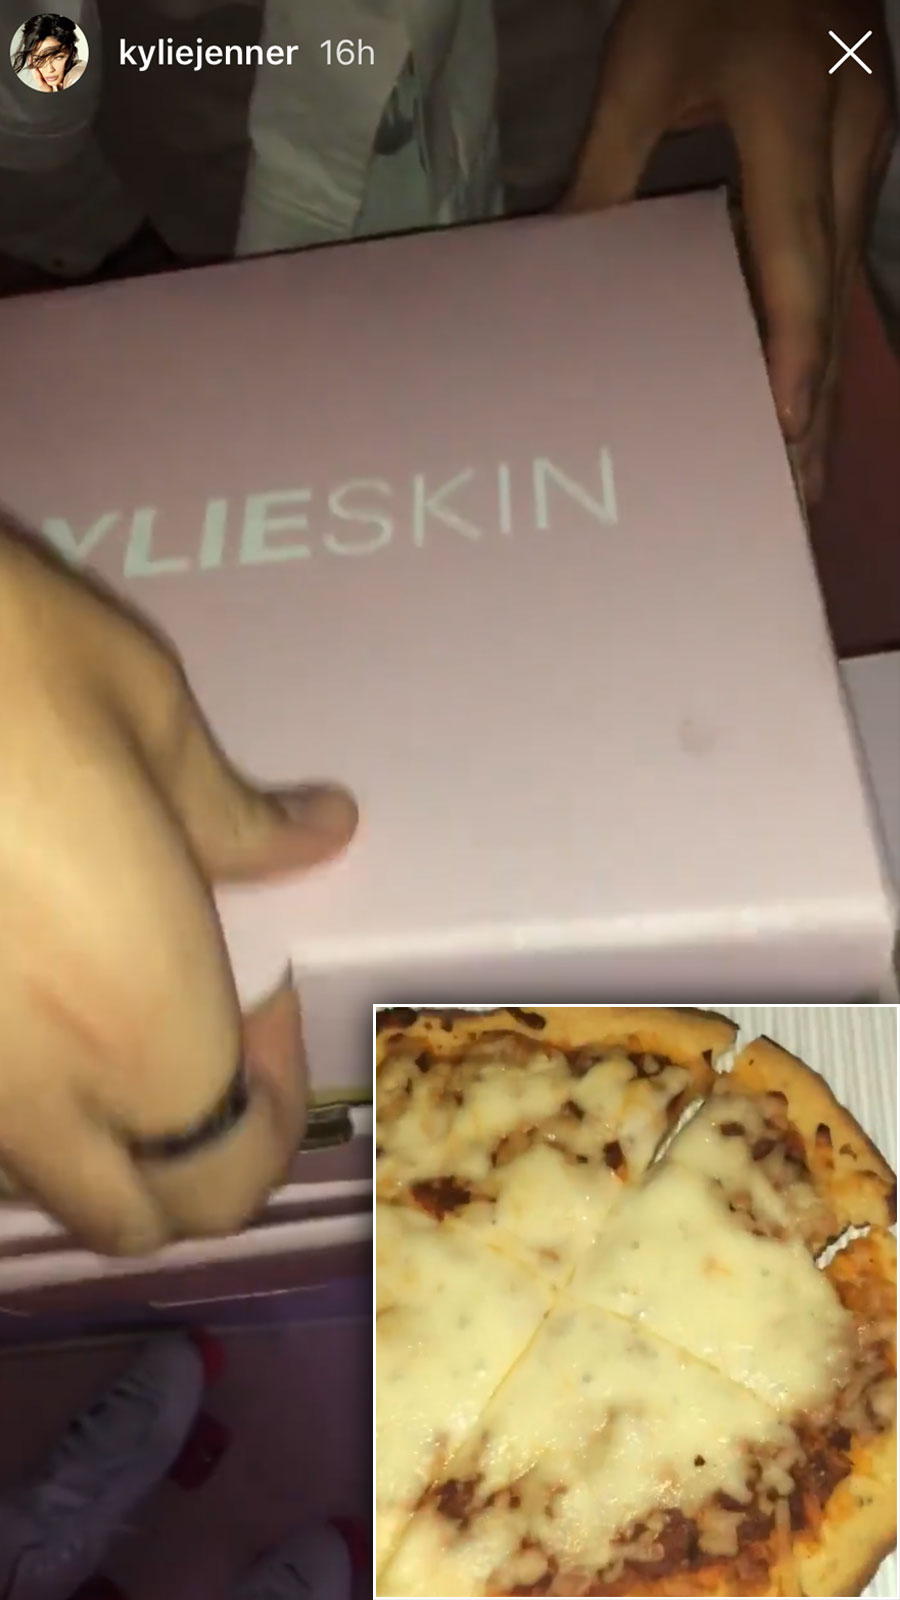 All the Food at Kylie Jenner's KylieSkin Launch Party Was Pink